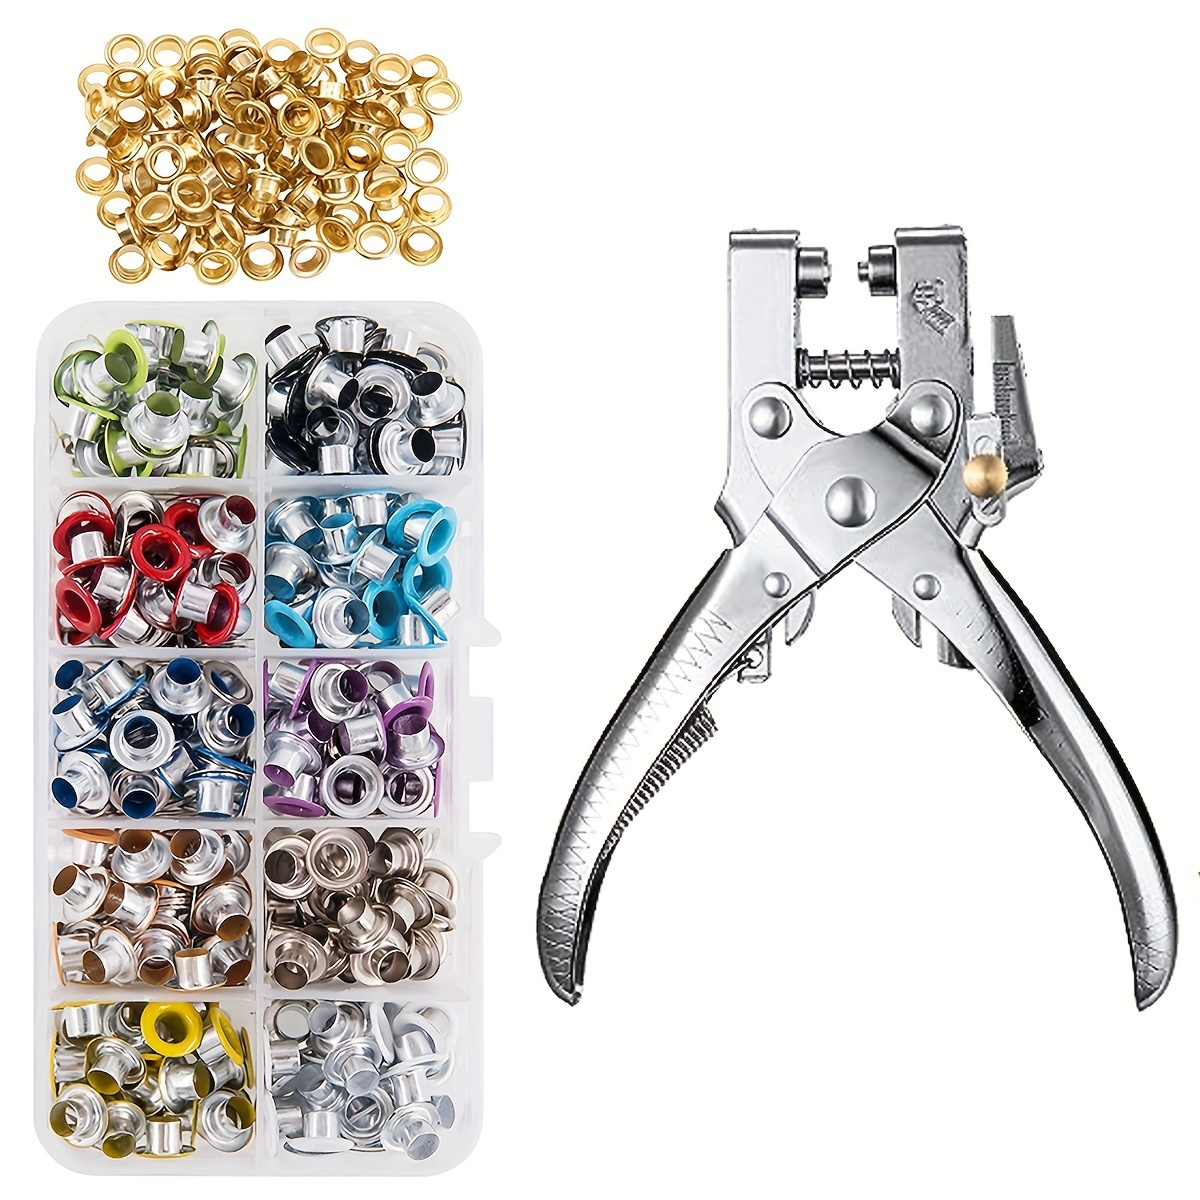 

400pcs 11 Colors Metal Grommets Kit And 1pc Eyelet Hole Punch Pliers, Metal Eyelets Kits Shoe Eyelets Grommet Sets For Leather Fabric Belt Clothes